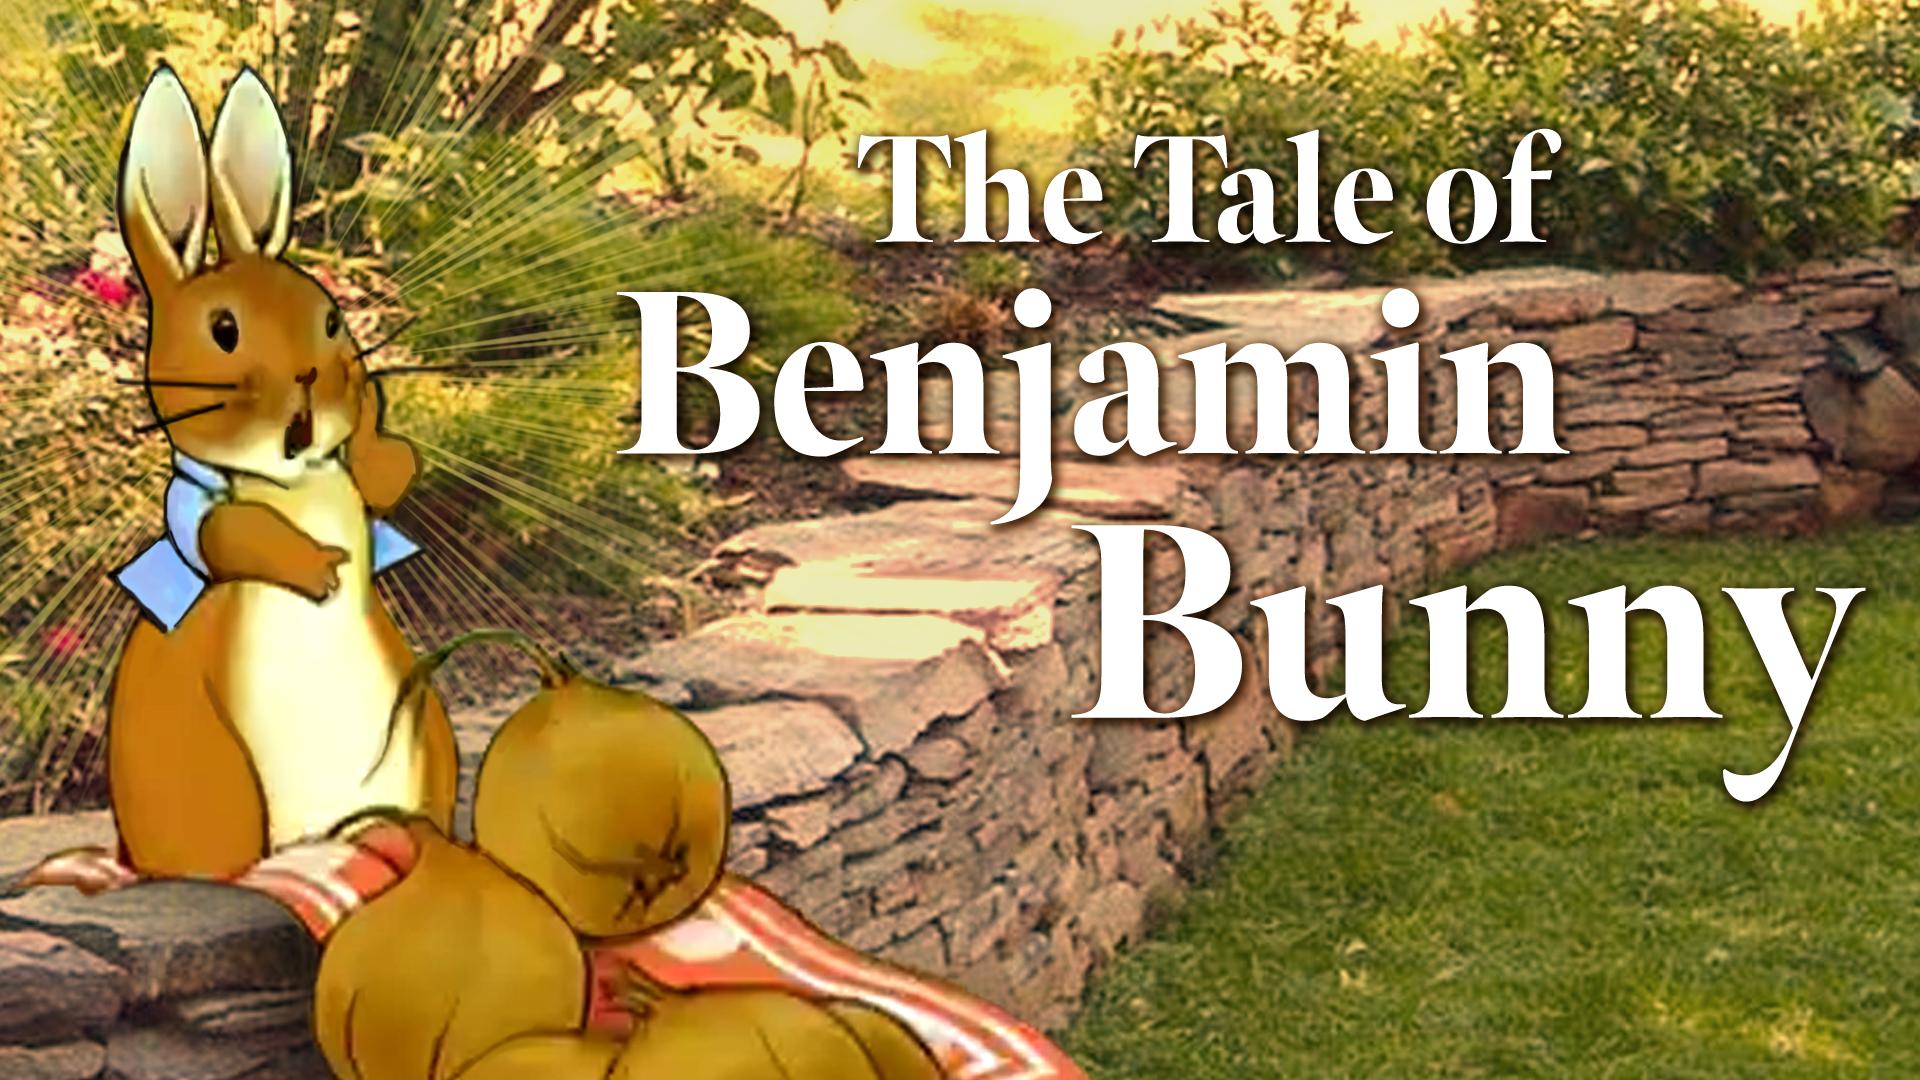 The Tale of Benjamin Bunny by Beatrix Potter | Read Aloud | Storytime with Jared